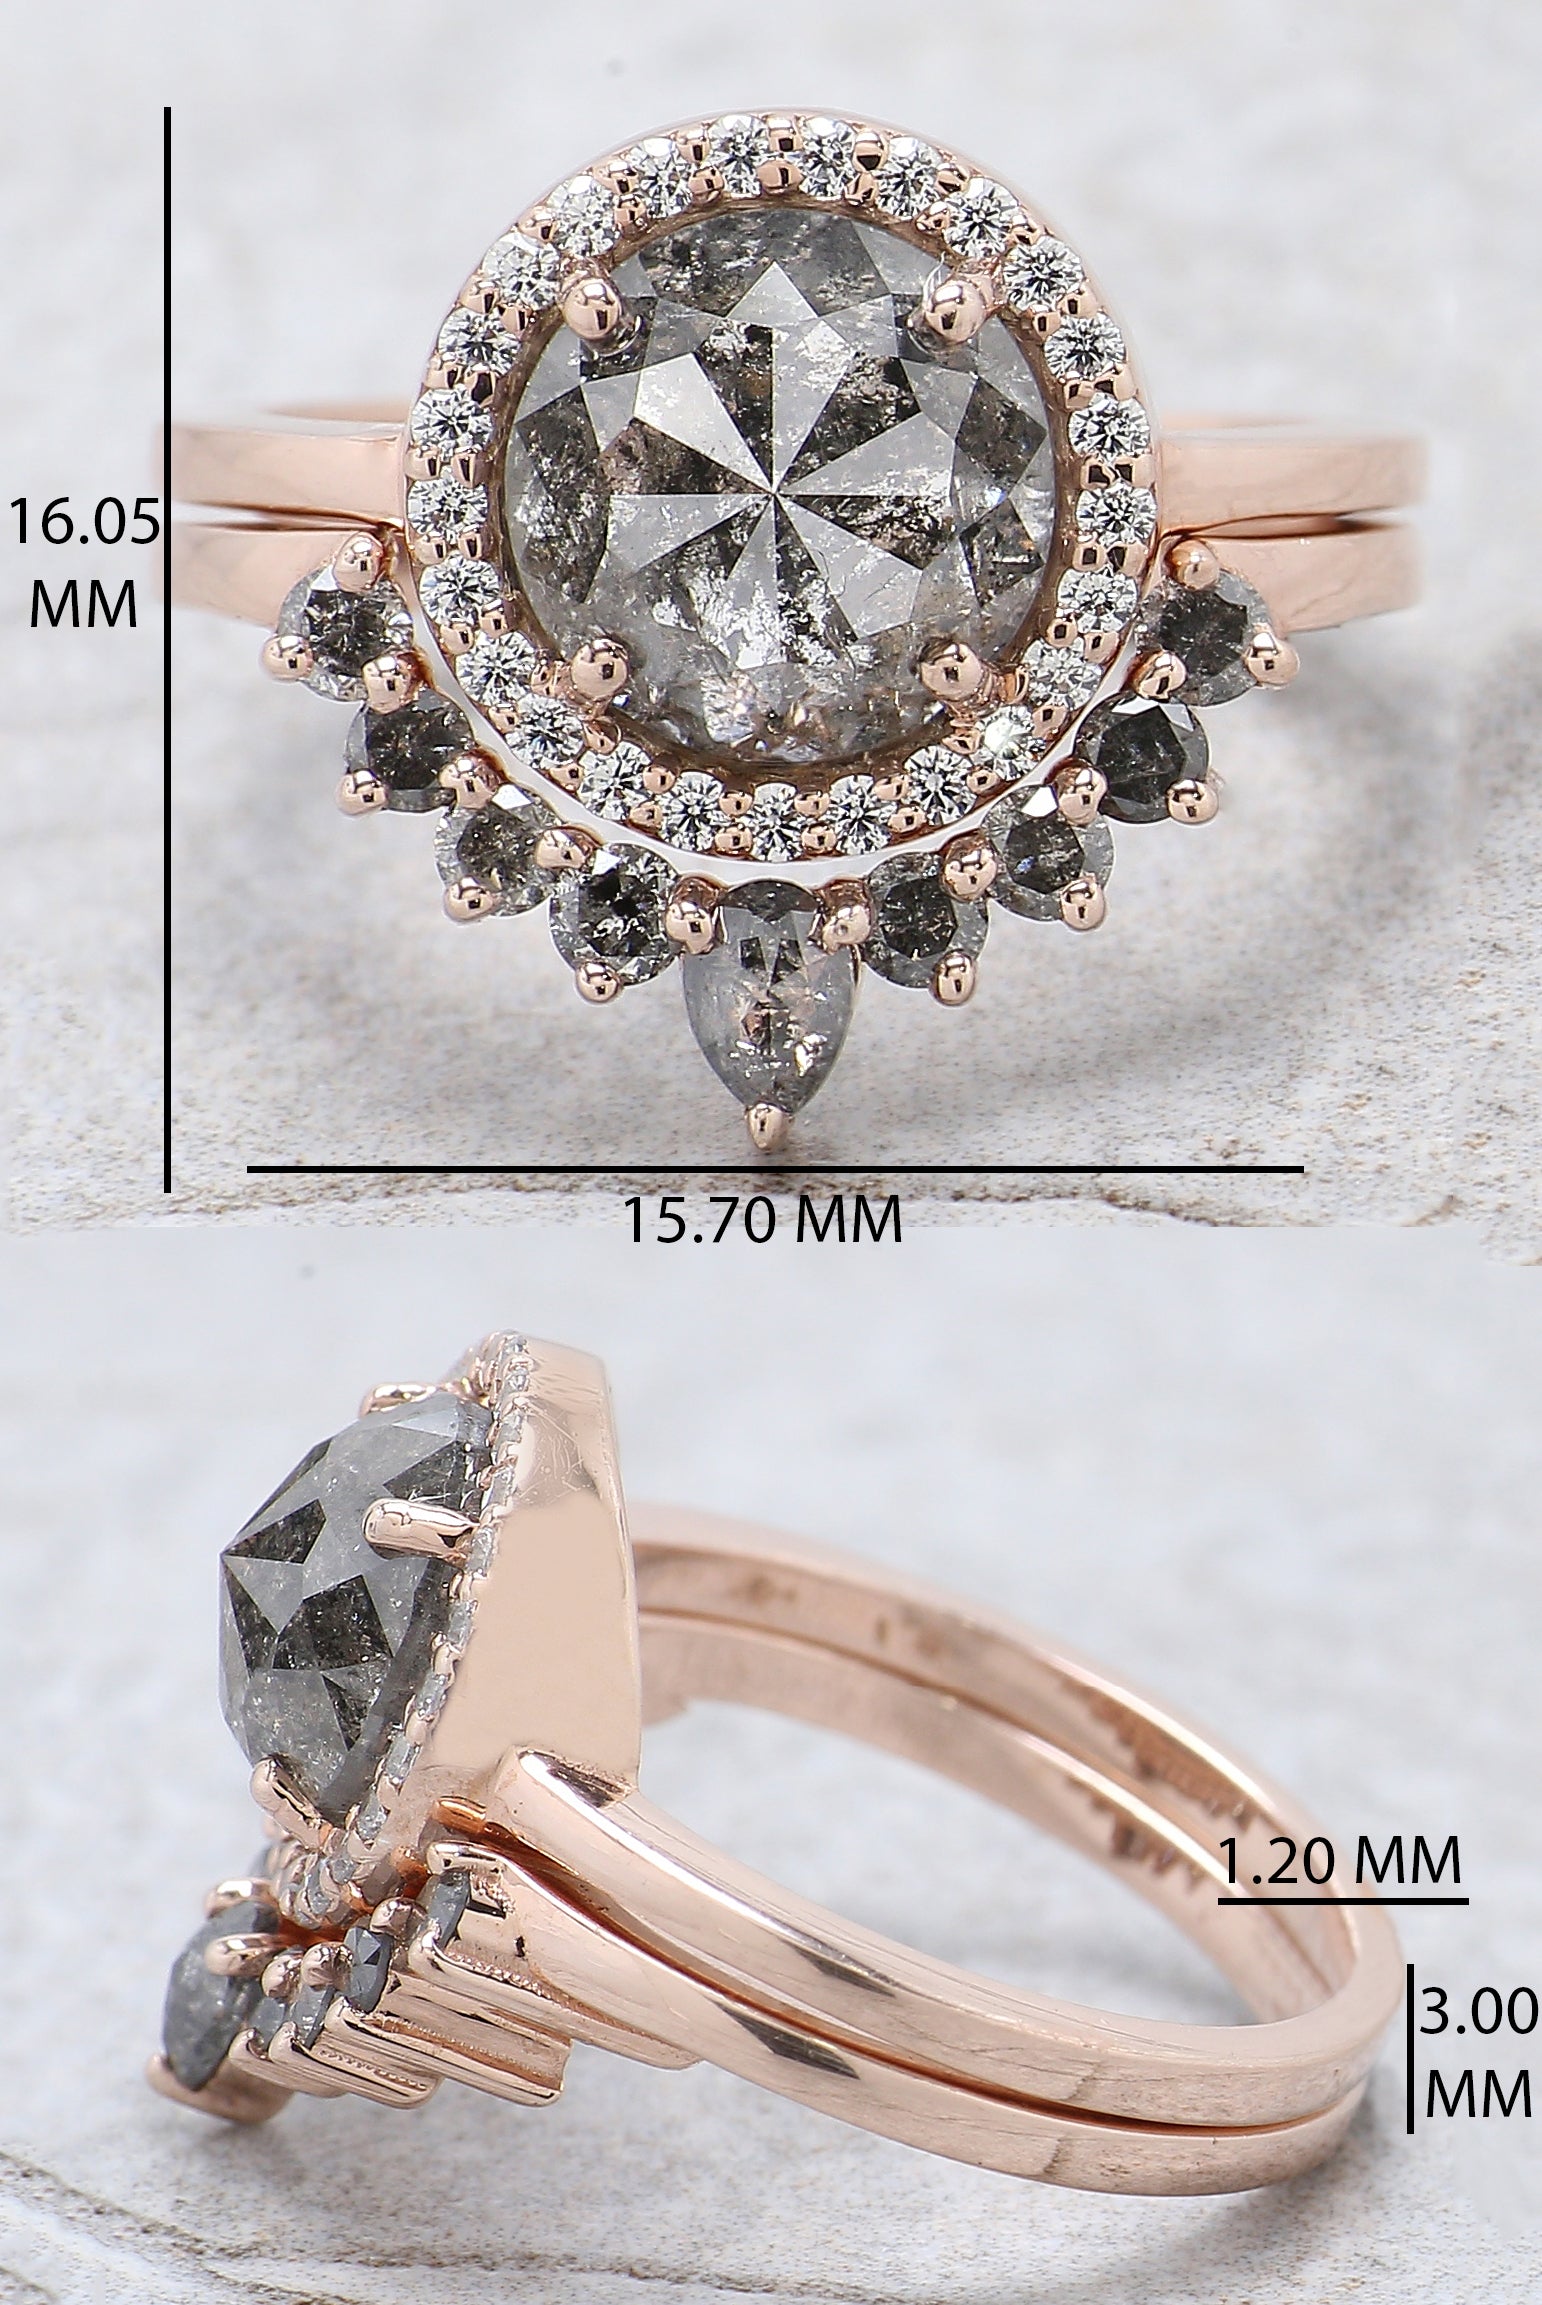 Round Rose Cut Salt And Pepper Diamond Ring 2.77 Ct 8.40 MM Round Diamond Ring 14K Rose Gold Silver Engagement Ring Gift For Her QL9731